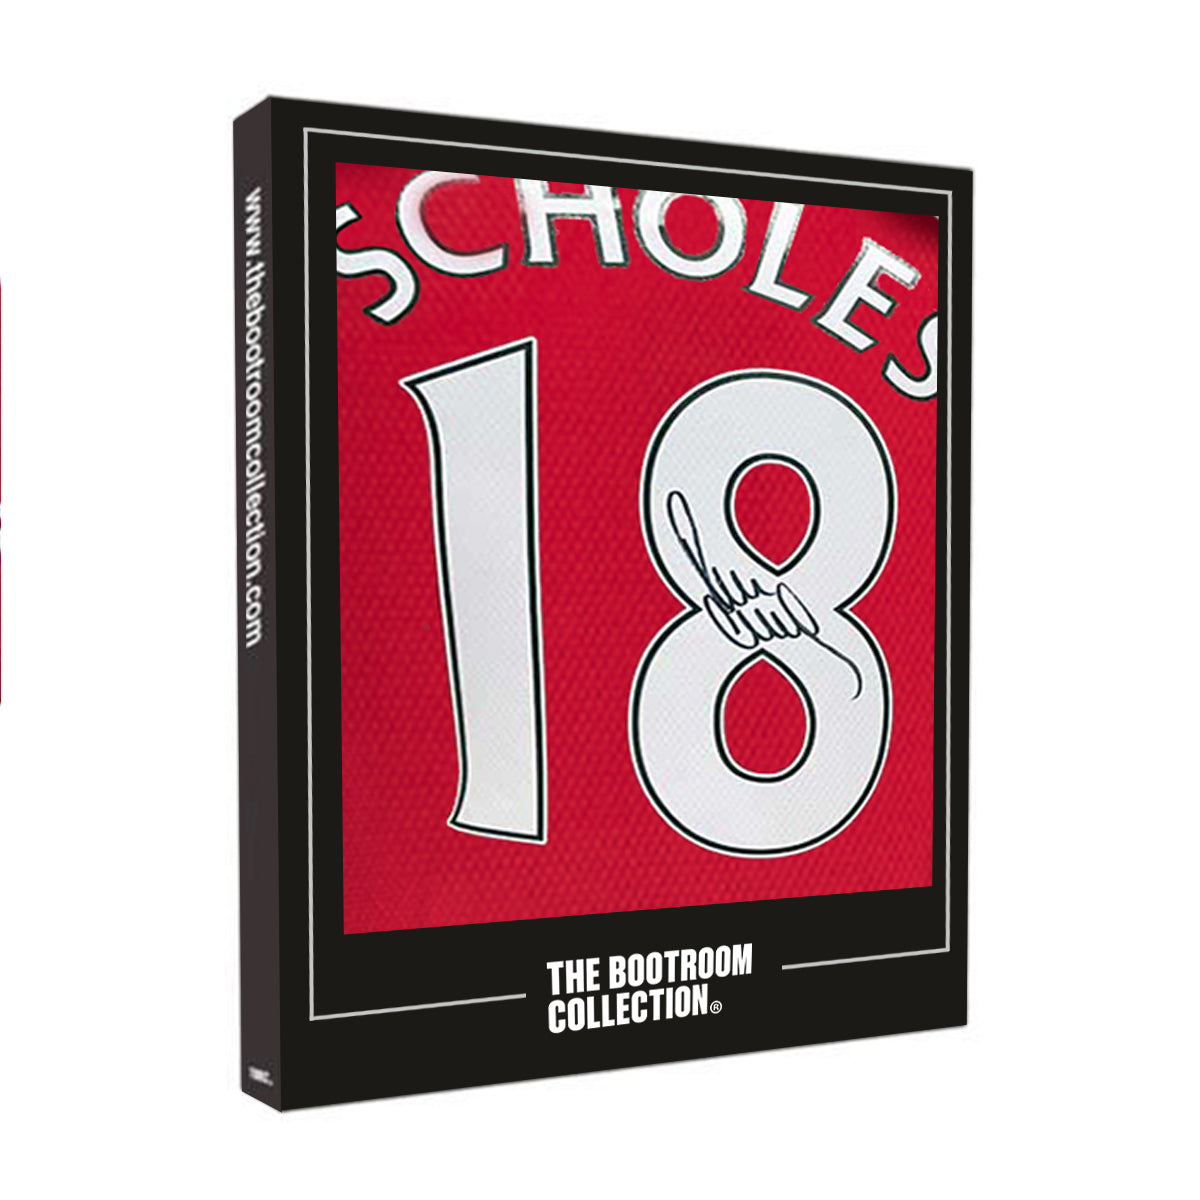 Paul Scholes Signed Manchester United #18 Shirt (Boxed) - The Bootroom Collection